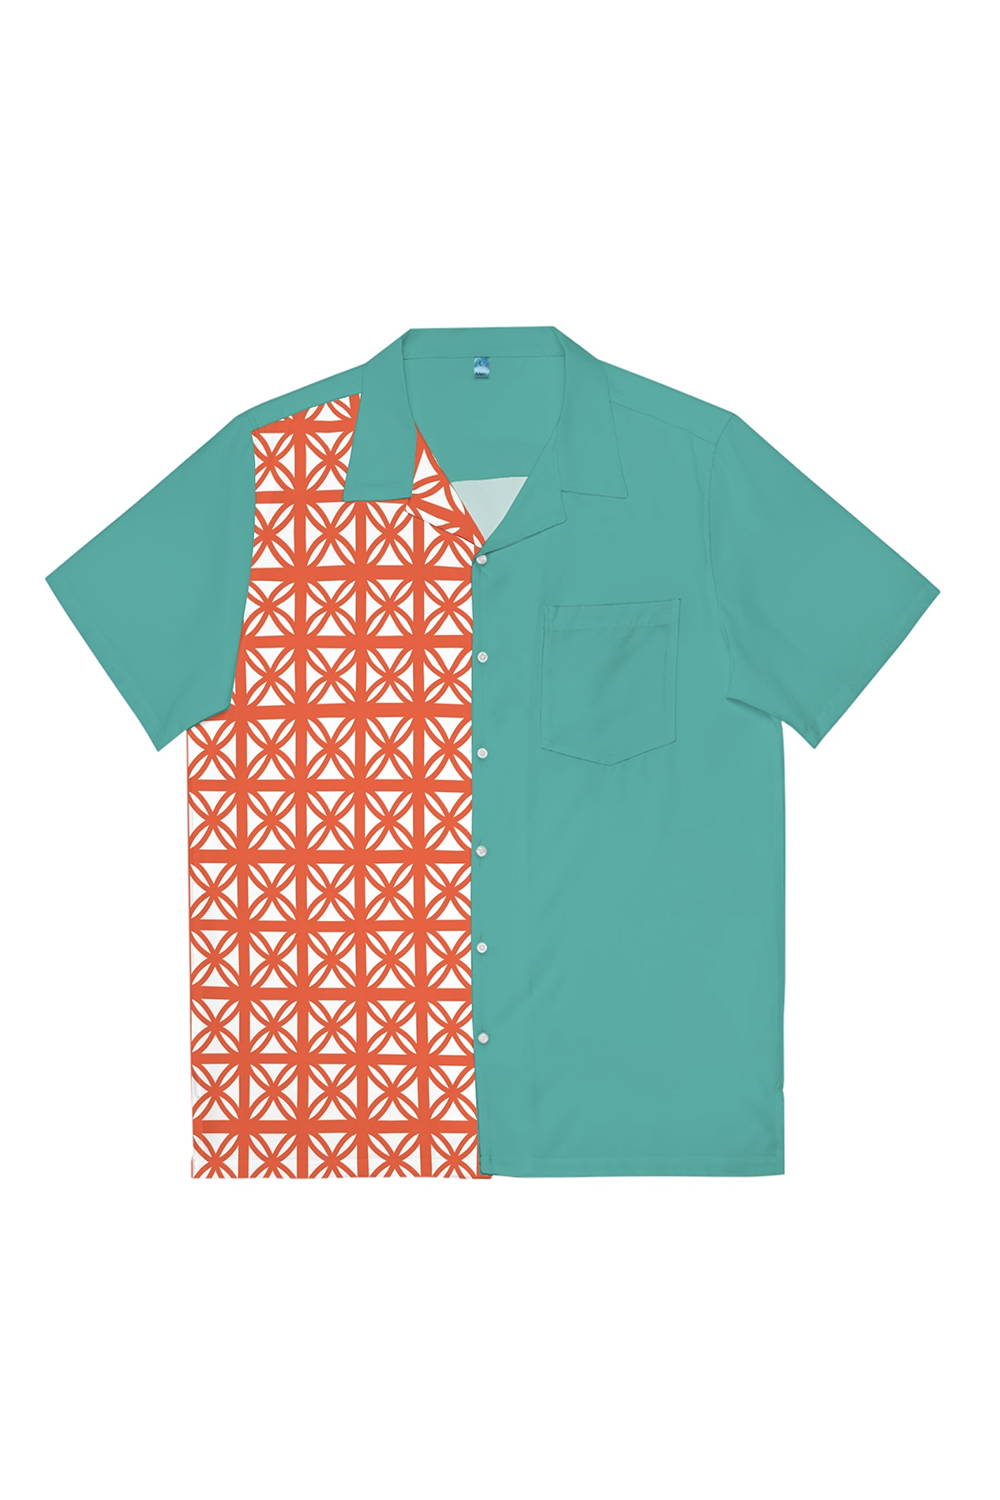 Turquoise and Orange Breeze Block Button Up Shirt